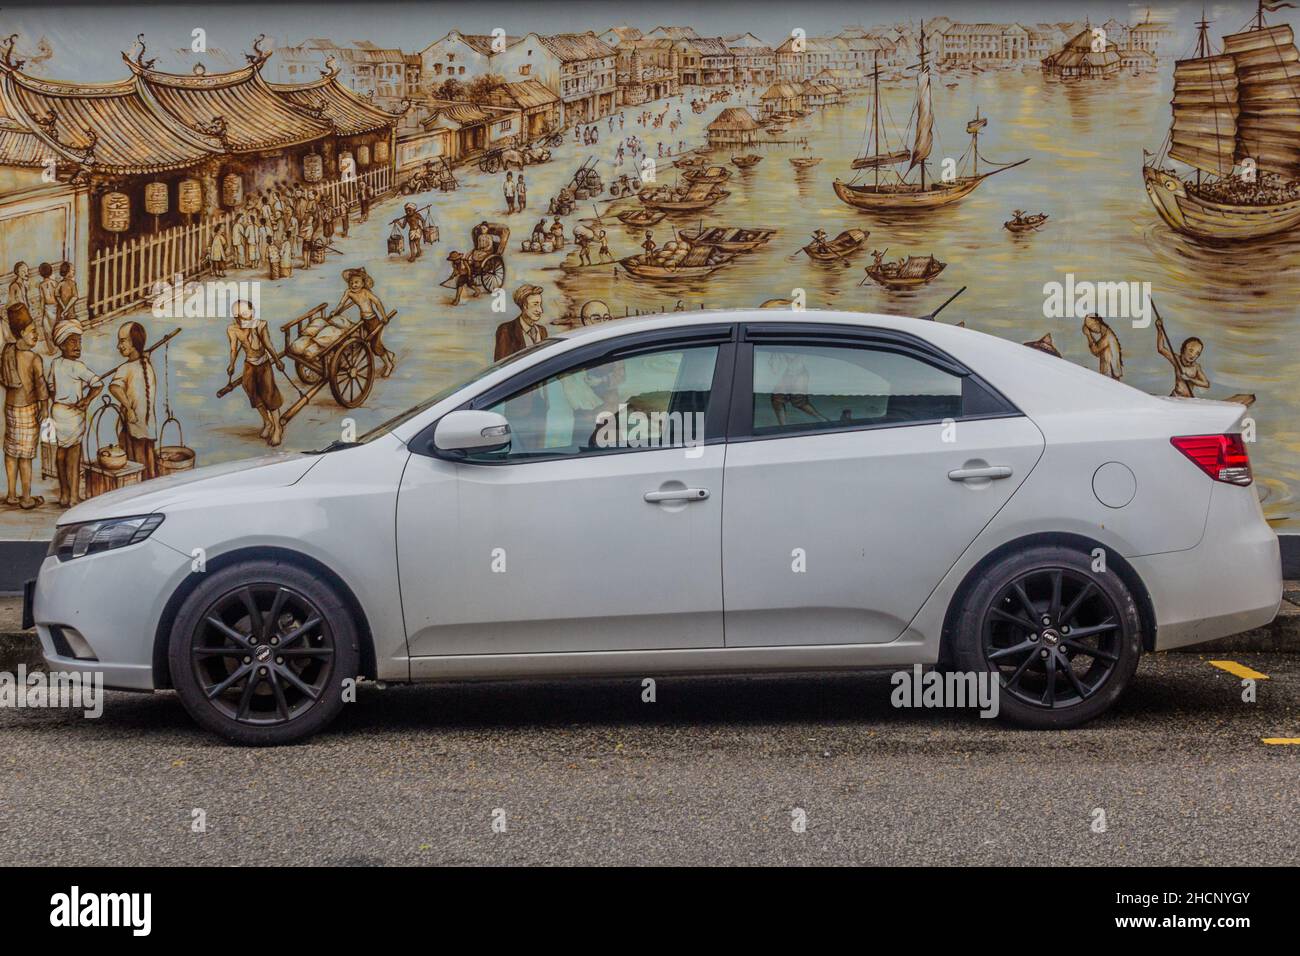 SINGAPORE, SINGAPORE - MARCH 12, 2018: Modern car in front of a wall painting of an old Singapore Stock Photo